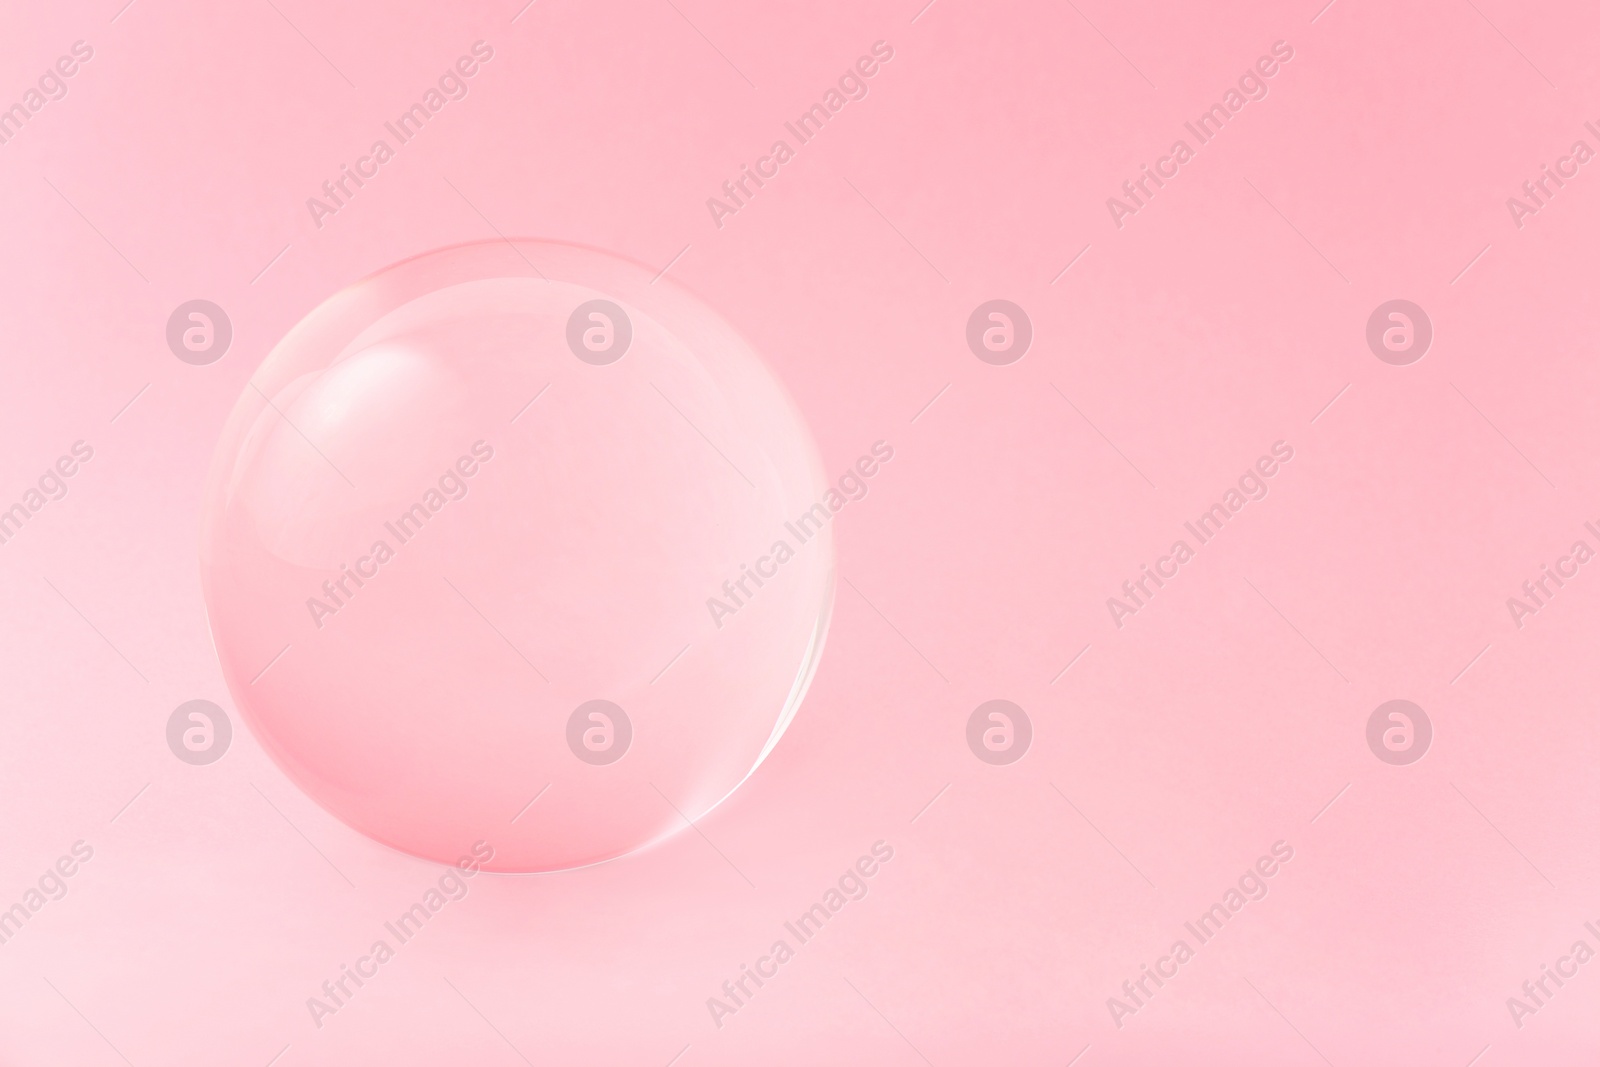 Photo of Transparent glass ball on light pink background. Space for text